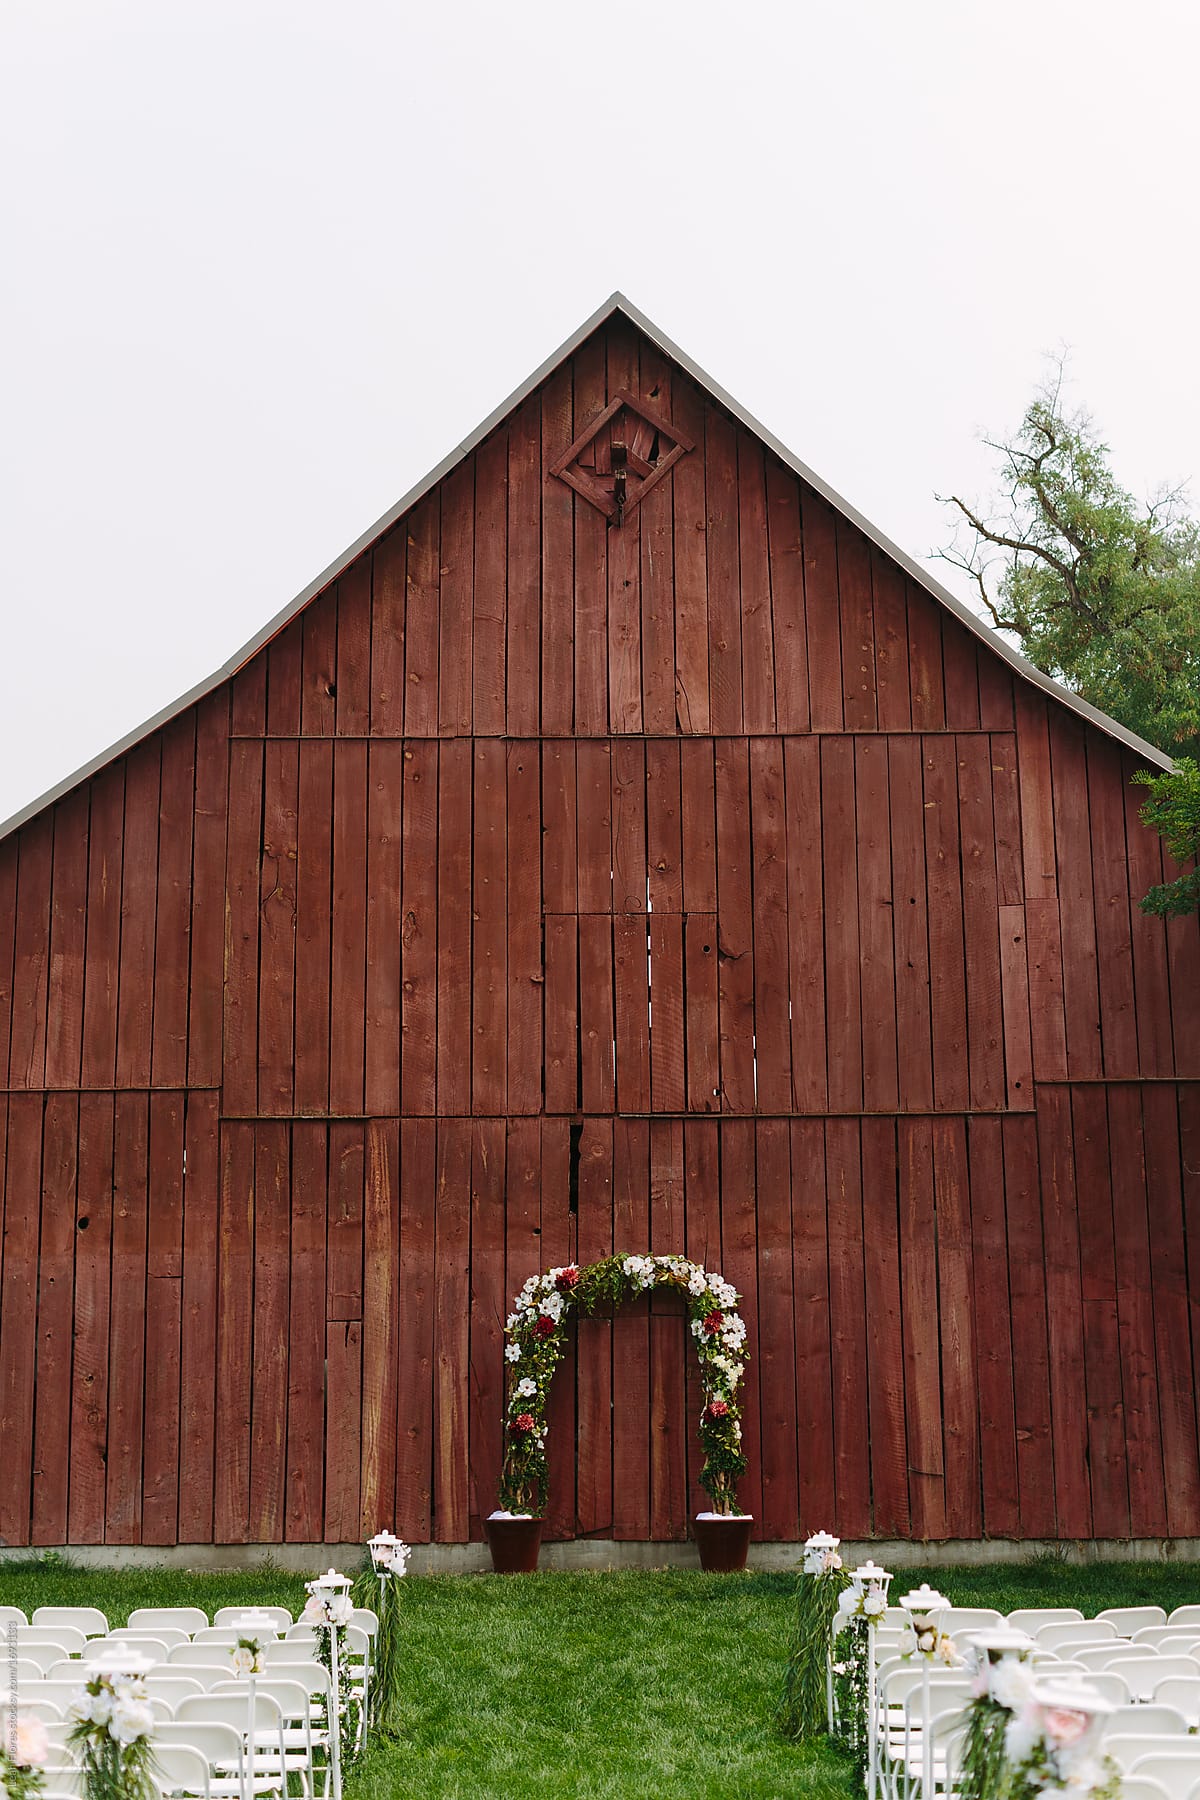 Wedding Arbor in front of Rustic Red Barn with Seating for Ceremony